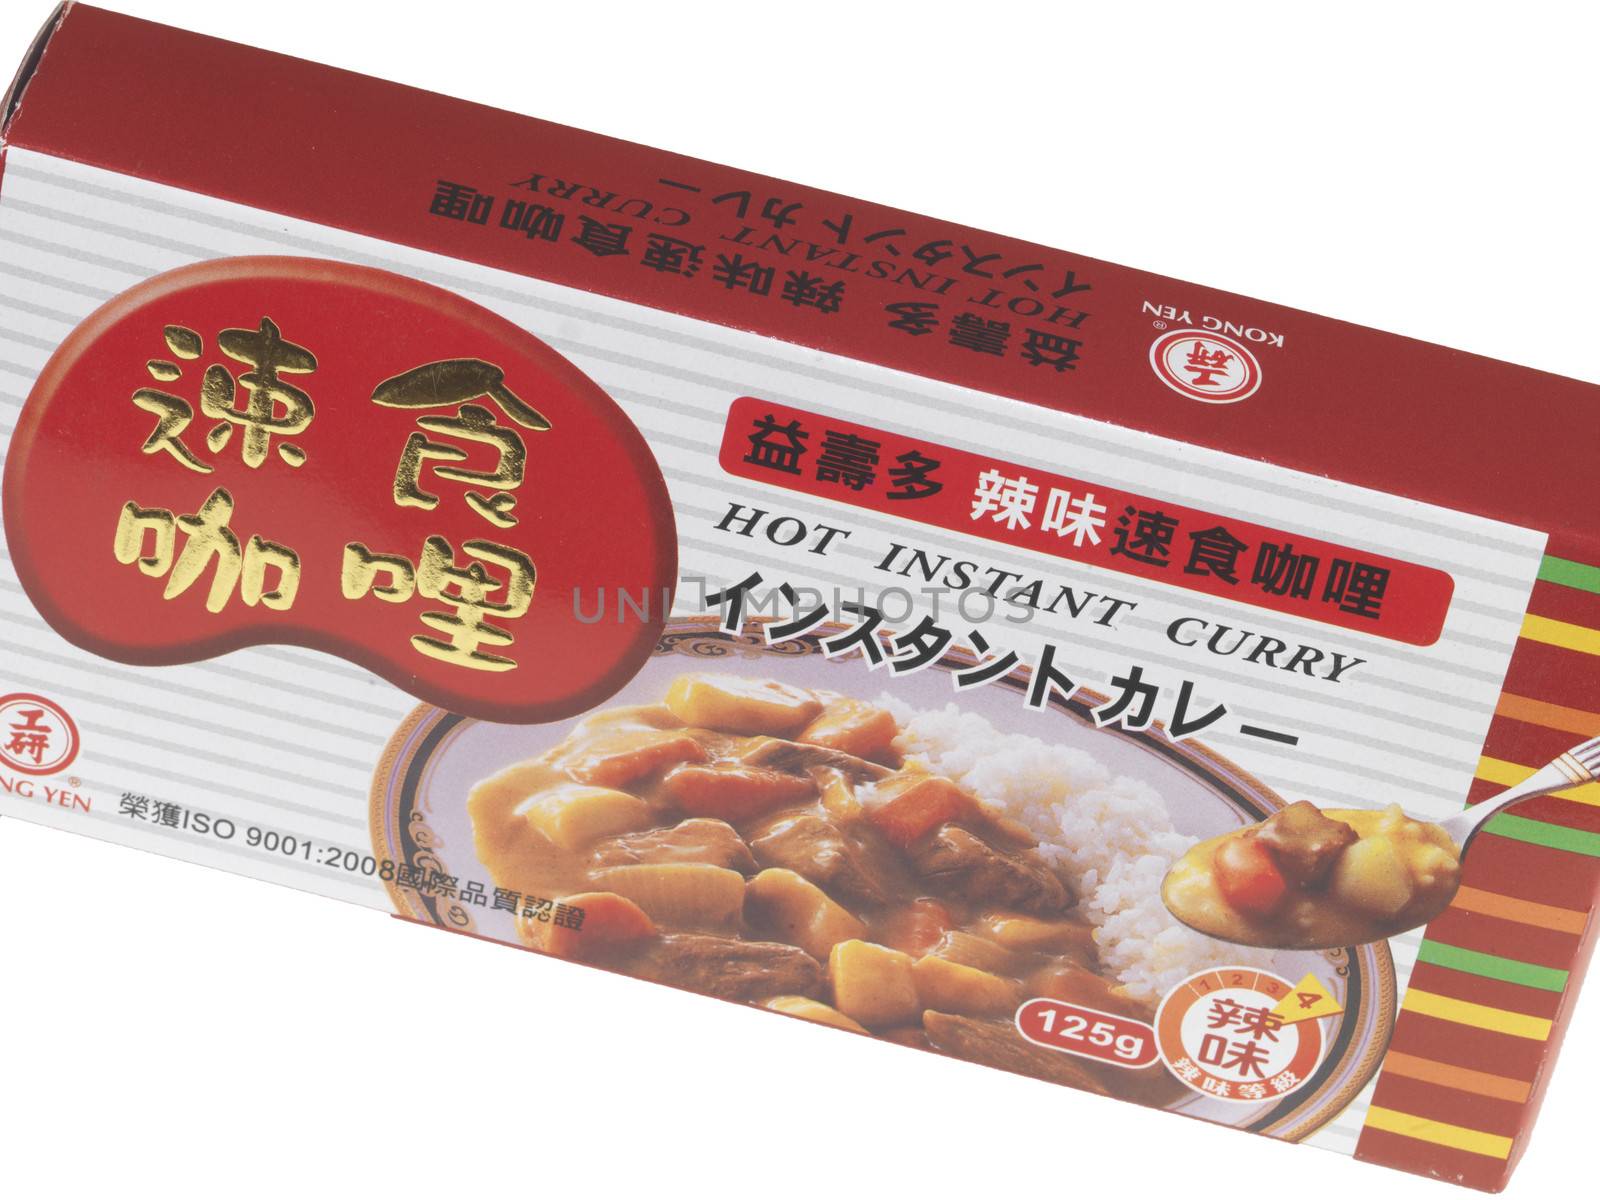 Box of Instant Chinese Curry Paste by Whiteboxmedia